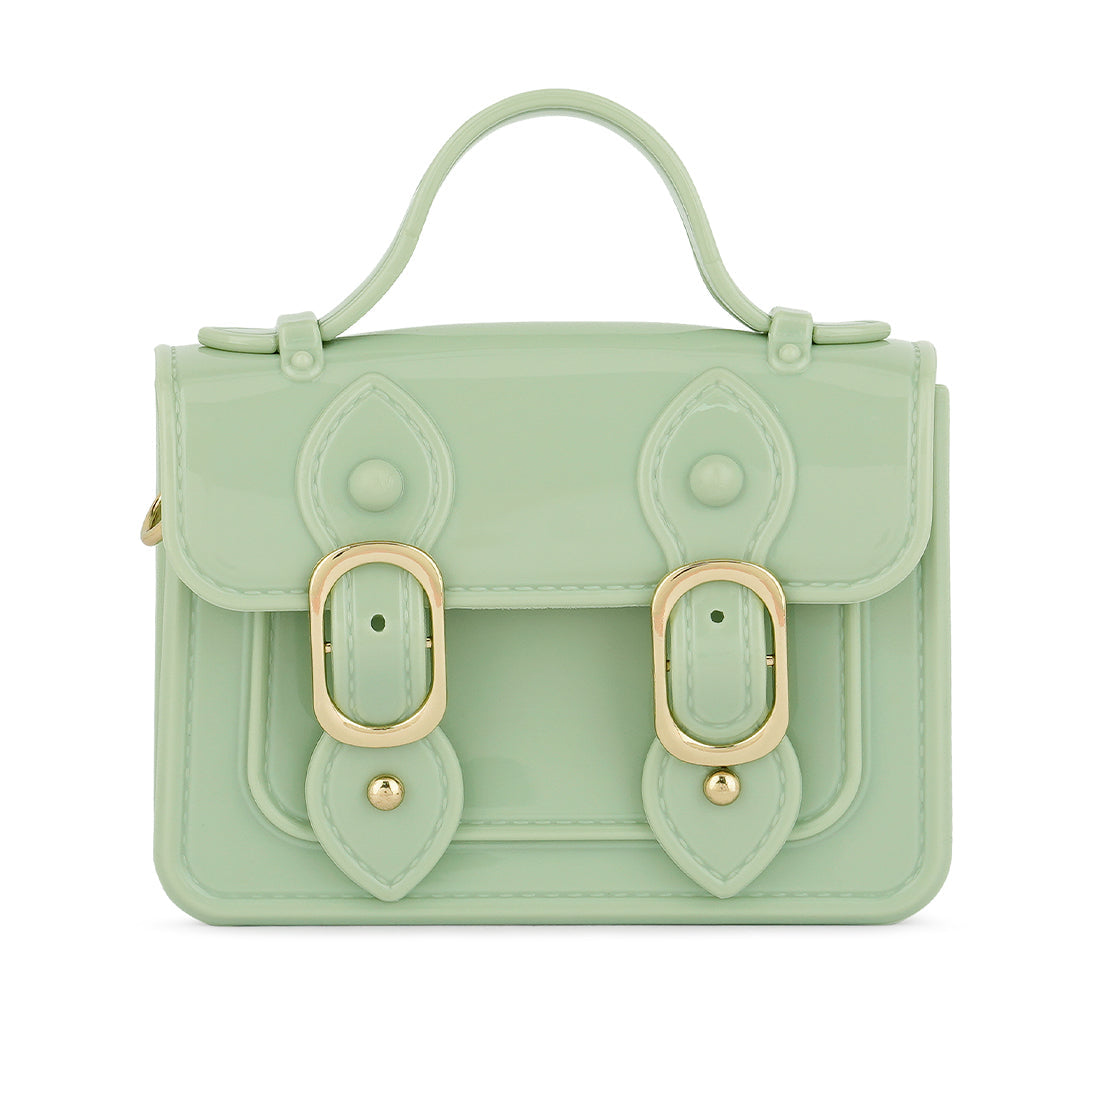 Jelly Saddle Sling Bag in Mint